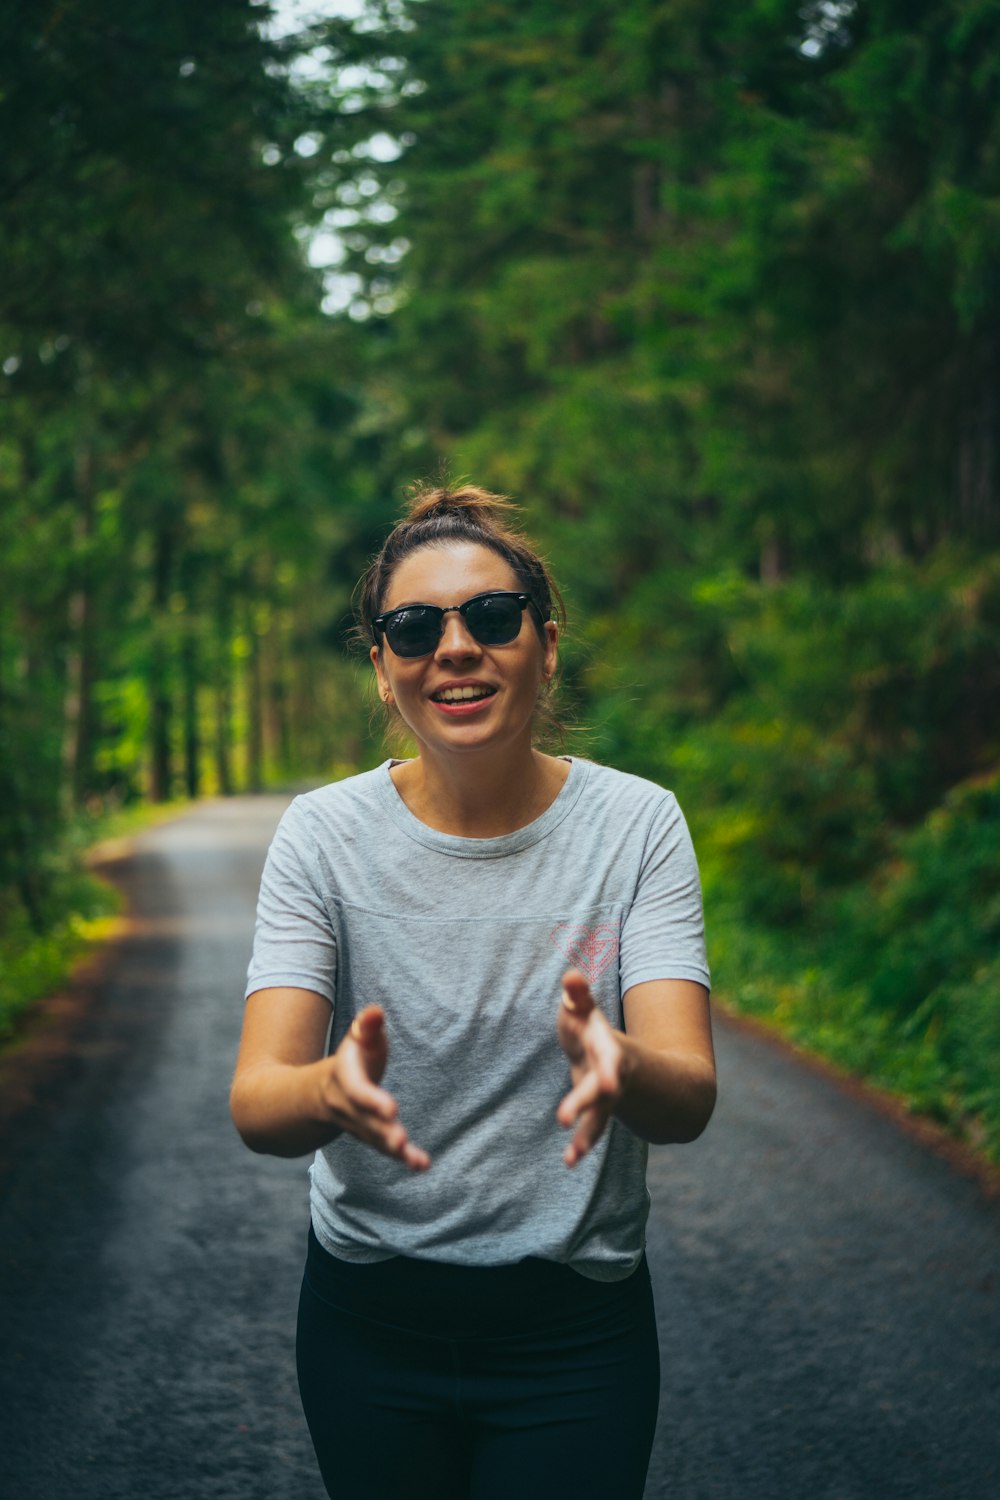 a person wearing sunglasses and standing on a path in the woods